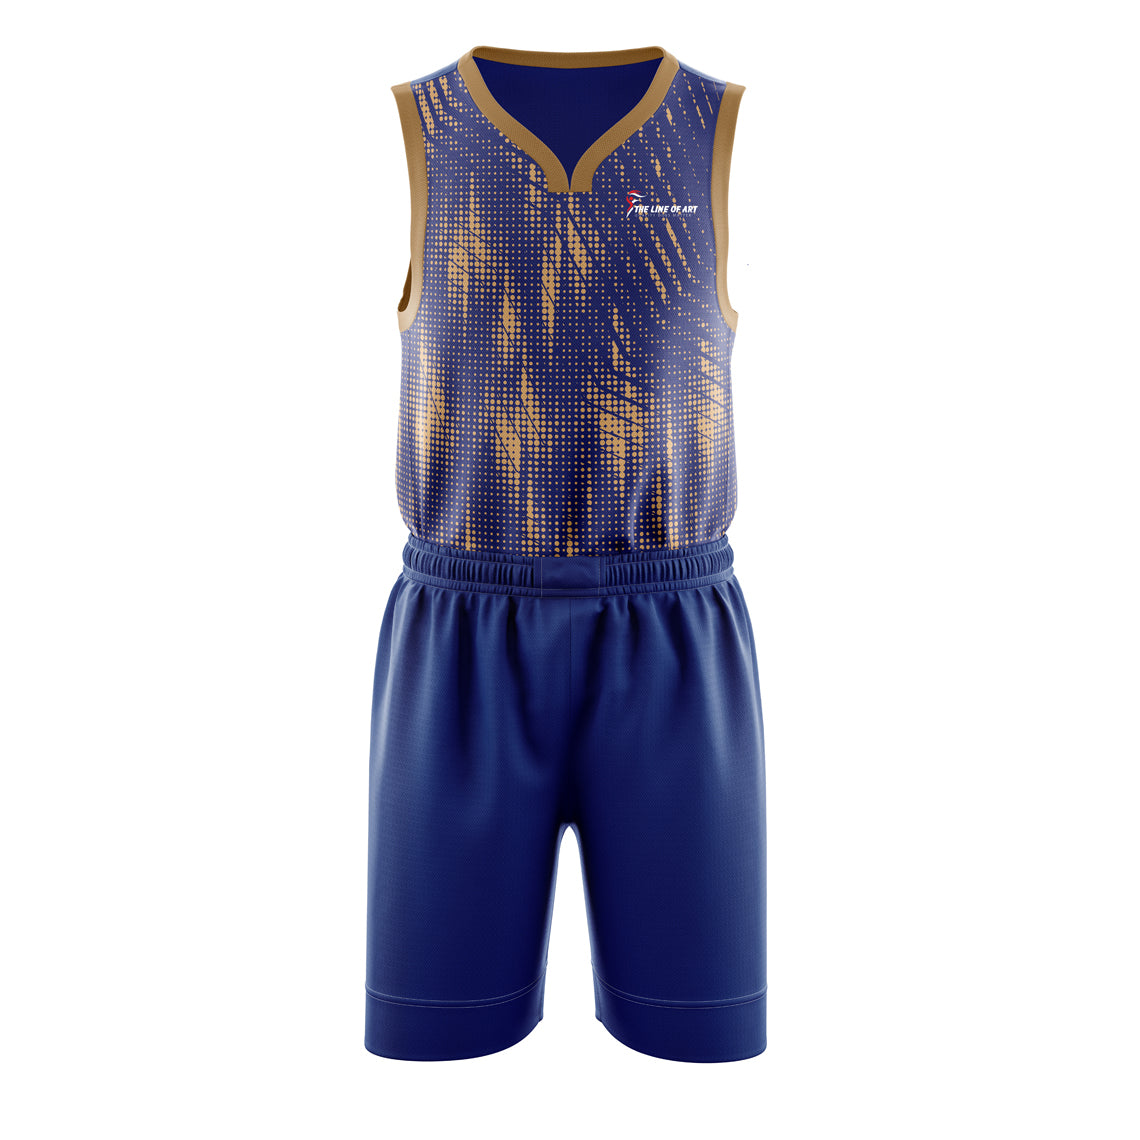 Customized Basketball Uniforms - Gear Up for Victory in Style! | Customized Soprtswear Uniforms